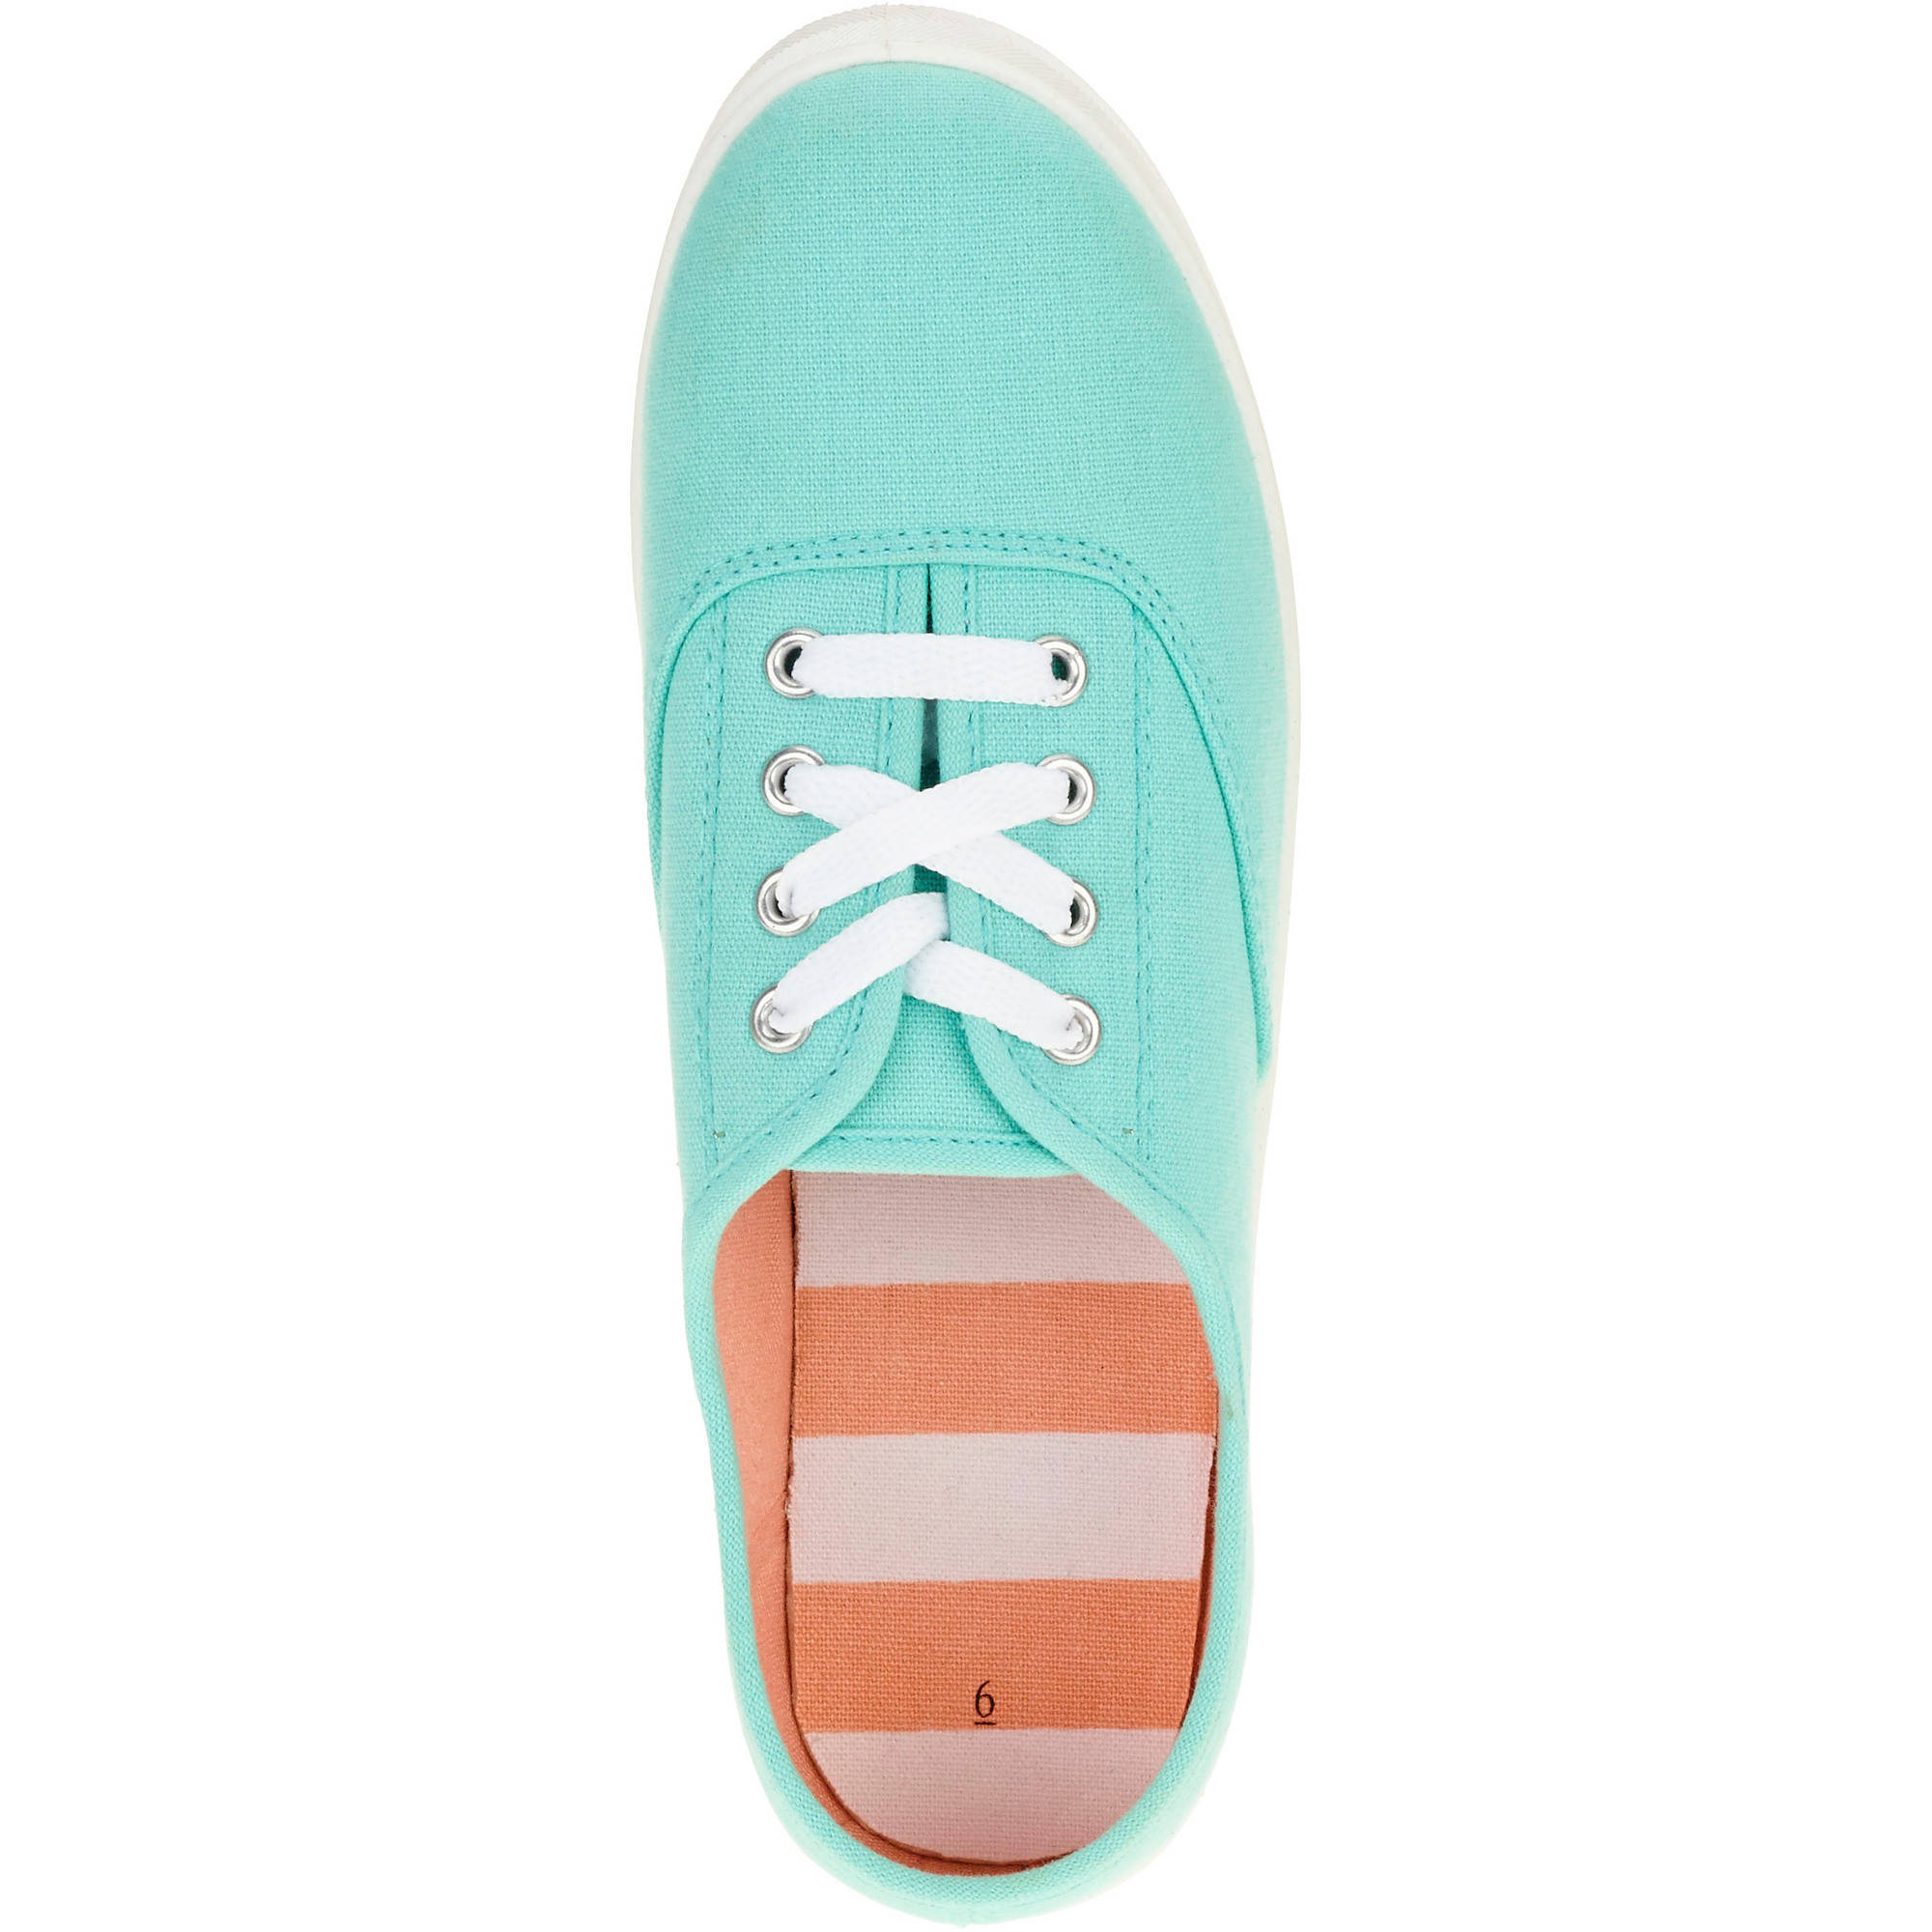 Women's Casual Canvas Lace-up Sneaker - image 4 of 5